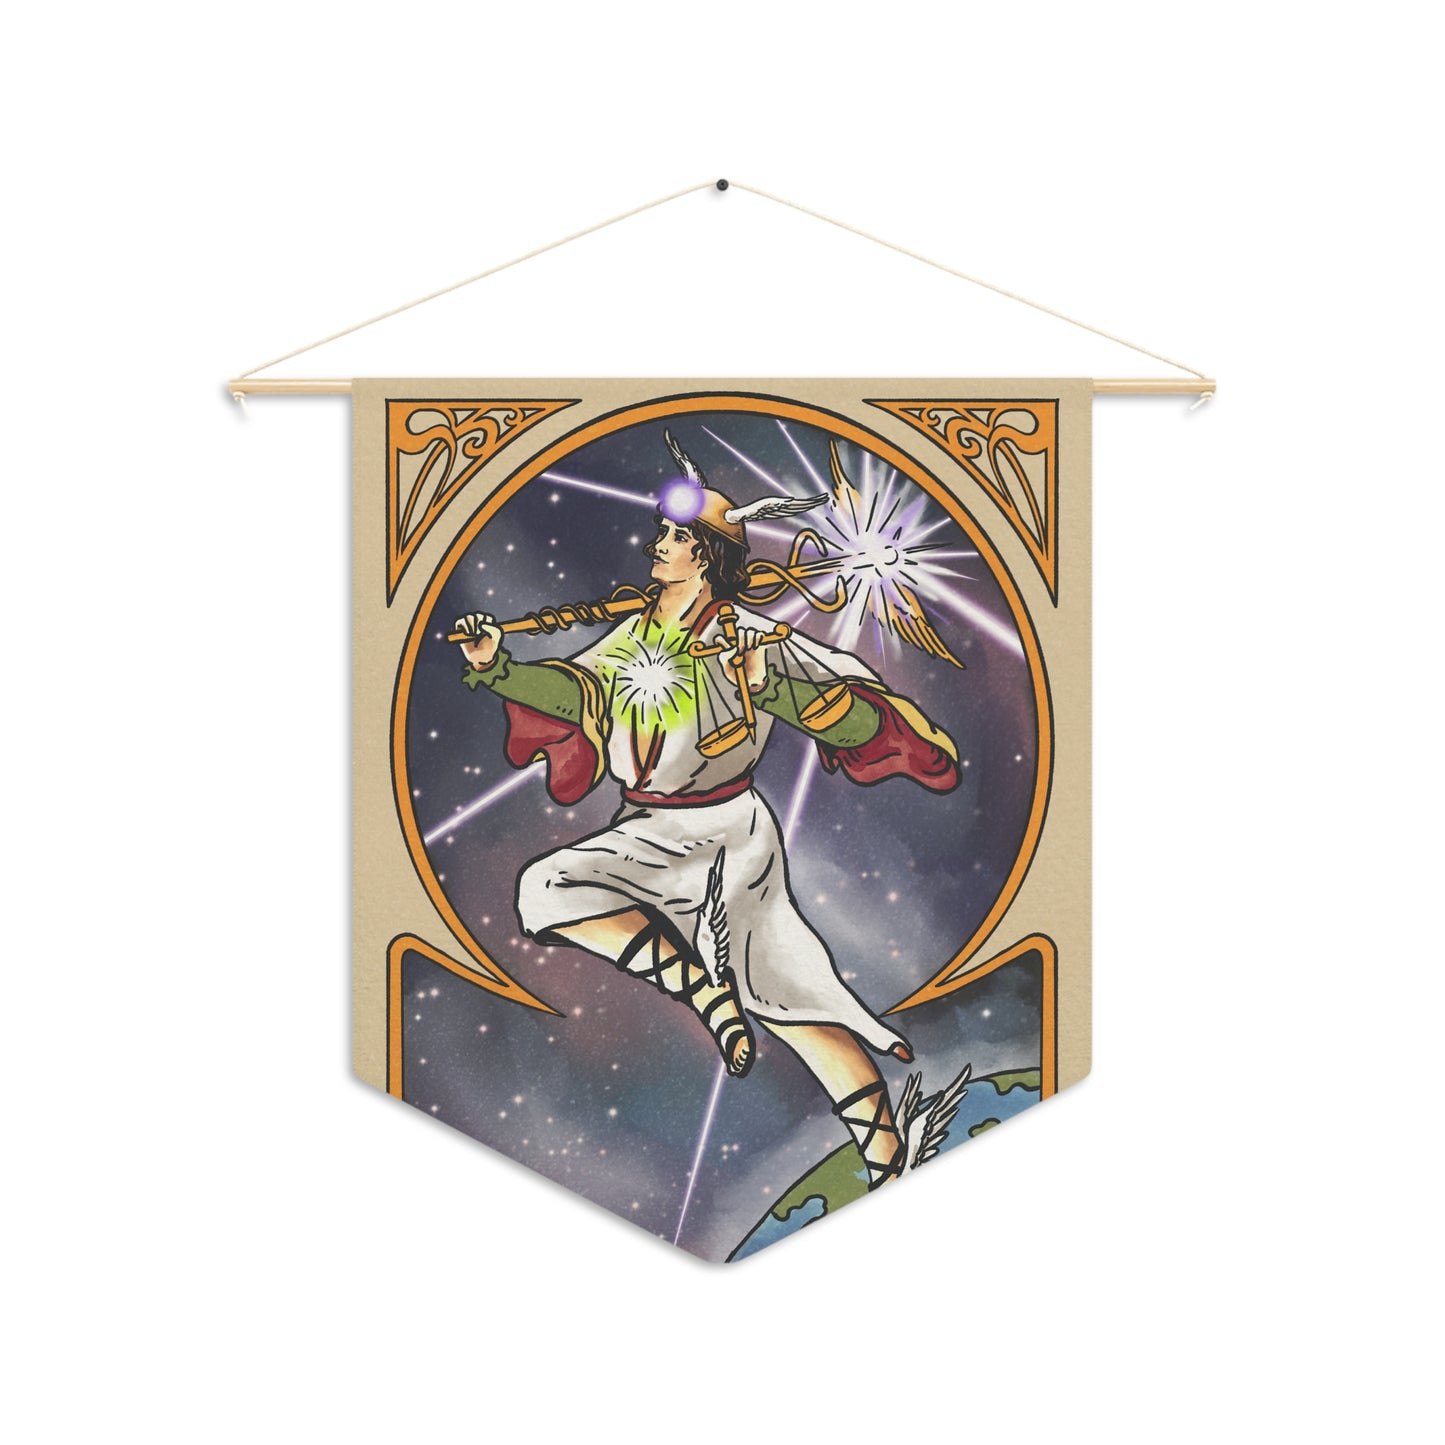 'The Fool Becomes Enlightened' Tarot Card Hanging Wall Pennant | Greek God Hermes